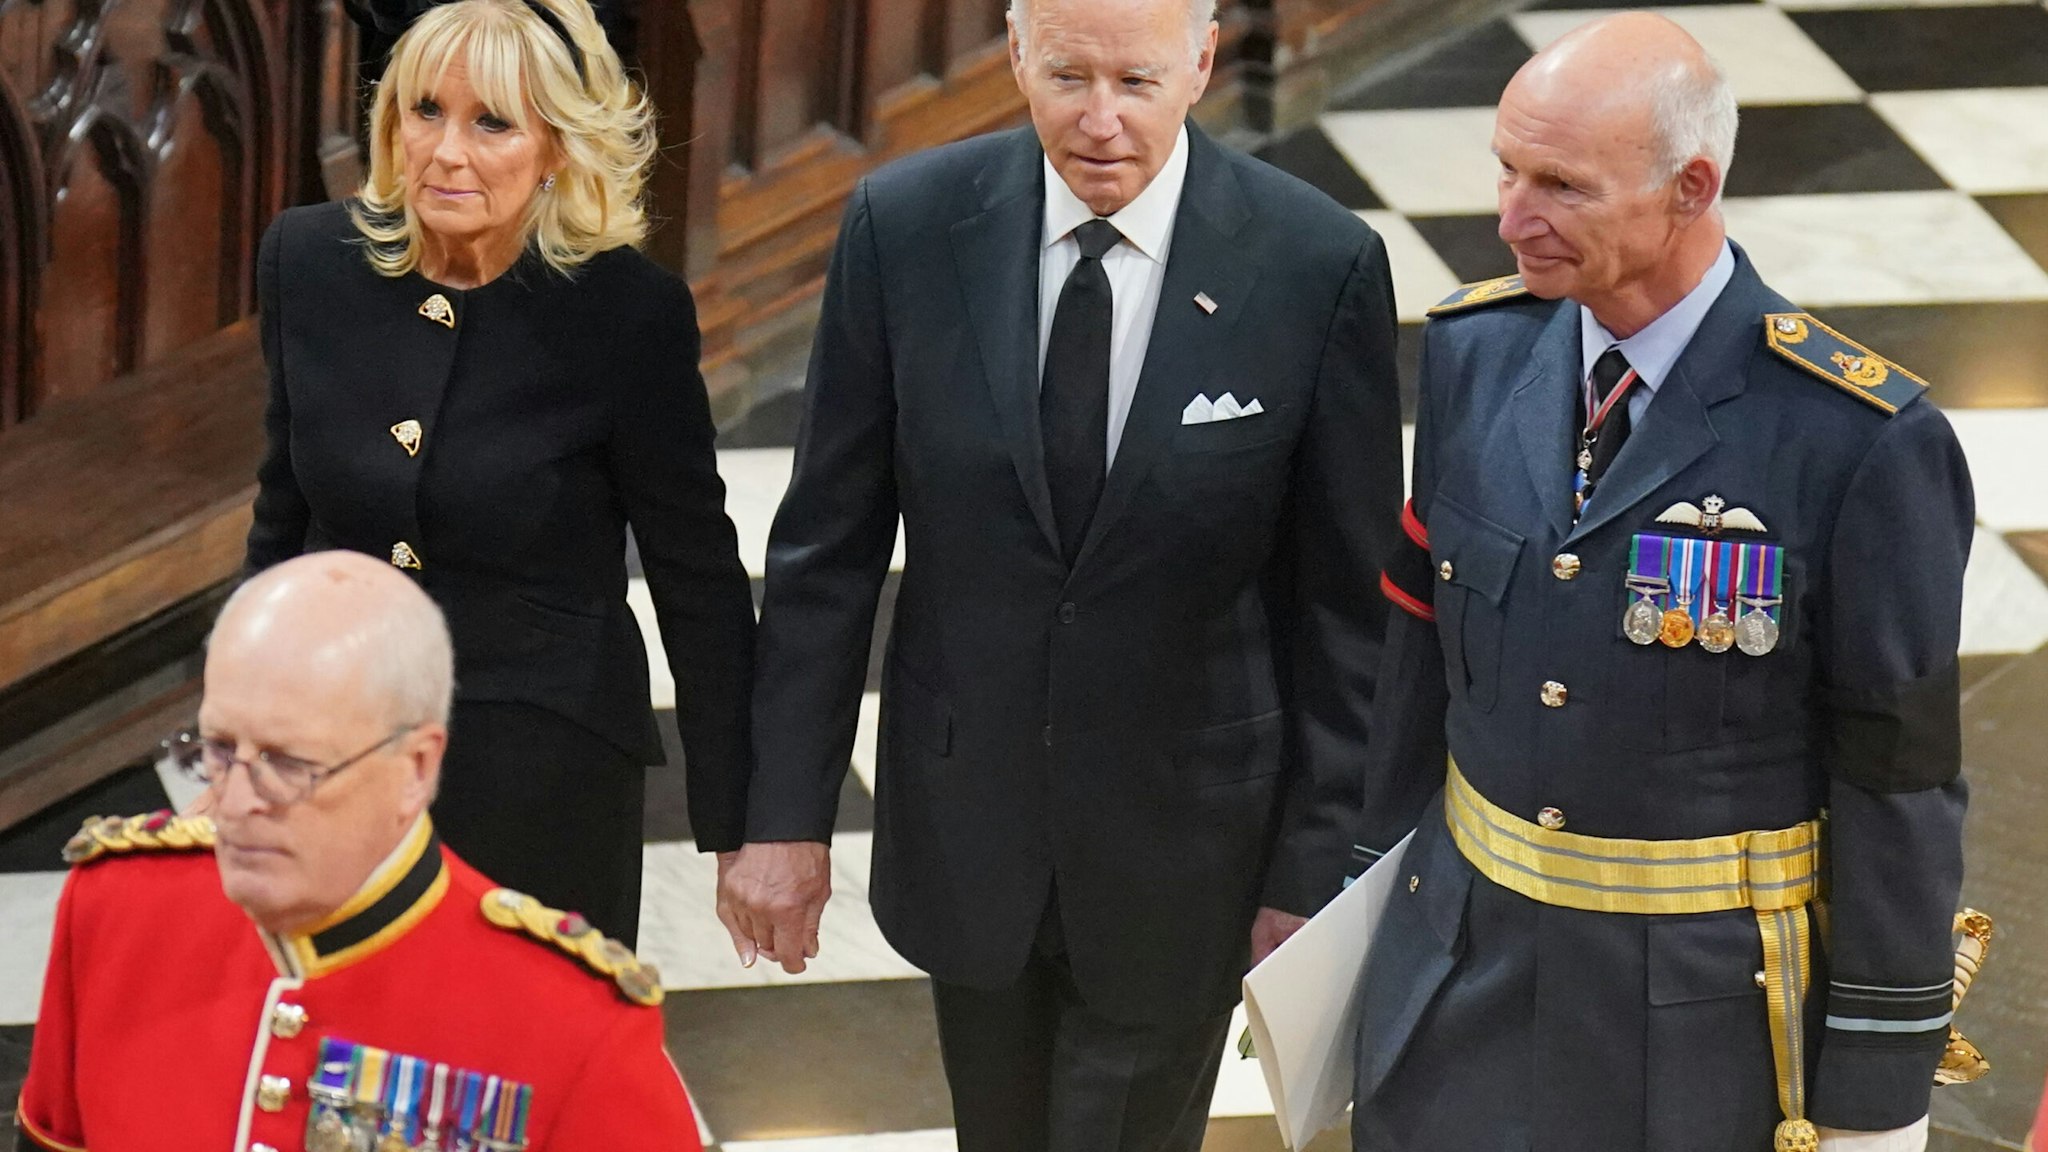 US President Joe Biden (centre) and First Lady Jill Biden arrive at the State Funeral of Queen Elizabeth II, held at Westminster Abbey, on September 19, 2022 in London, England. Elizabeth Alexandra Mary Windsor was born in Bruton Street, Mayfair, London on 21 April 1926. She married Prince Philip in 1947 and ascended the throne of the United Kingdom and Commonwealth on 6 February 1952 after the death of her Father, King George VI. Queen Elizabeth II died at Balmoral Castle in Scotland on September 8, 2022, and is succeeded by her eldest son, King Charles III.